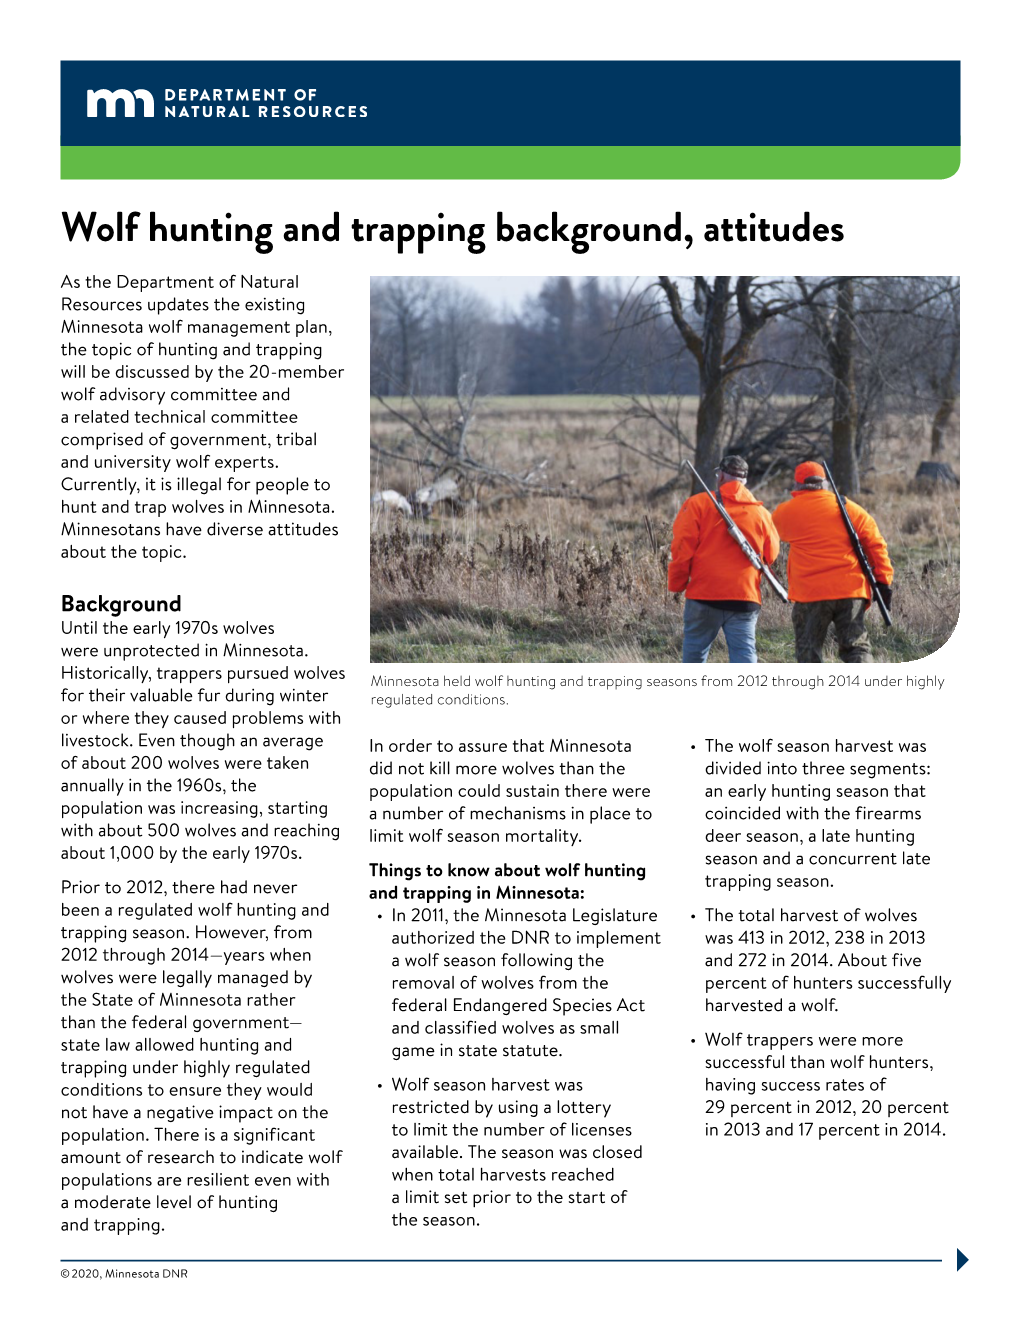 Wolf Hunting and Trapping Background, Attitudes